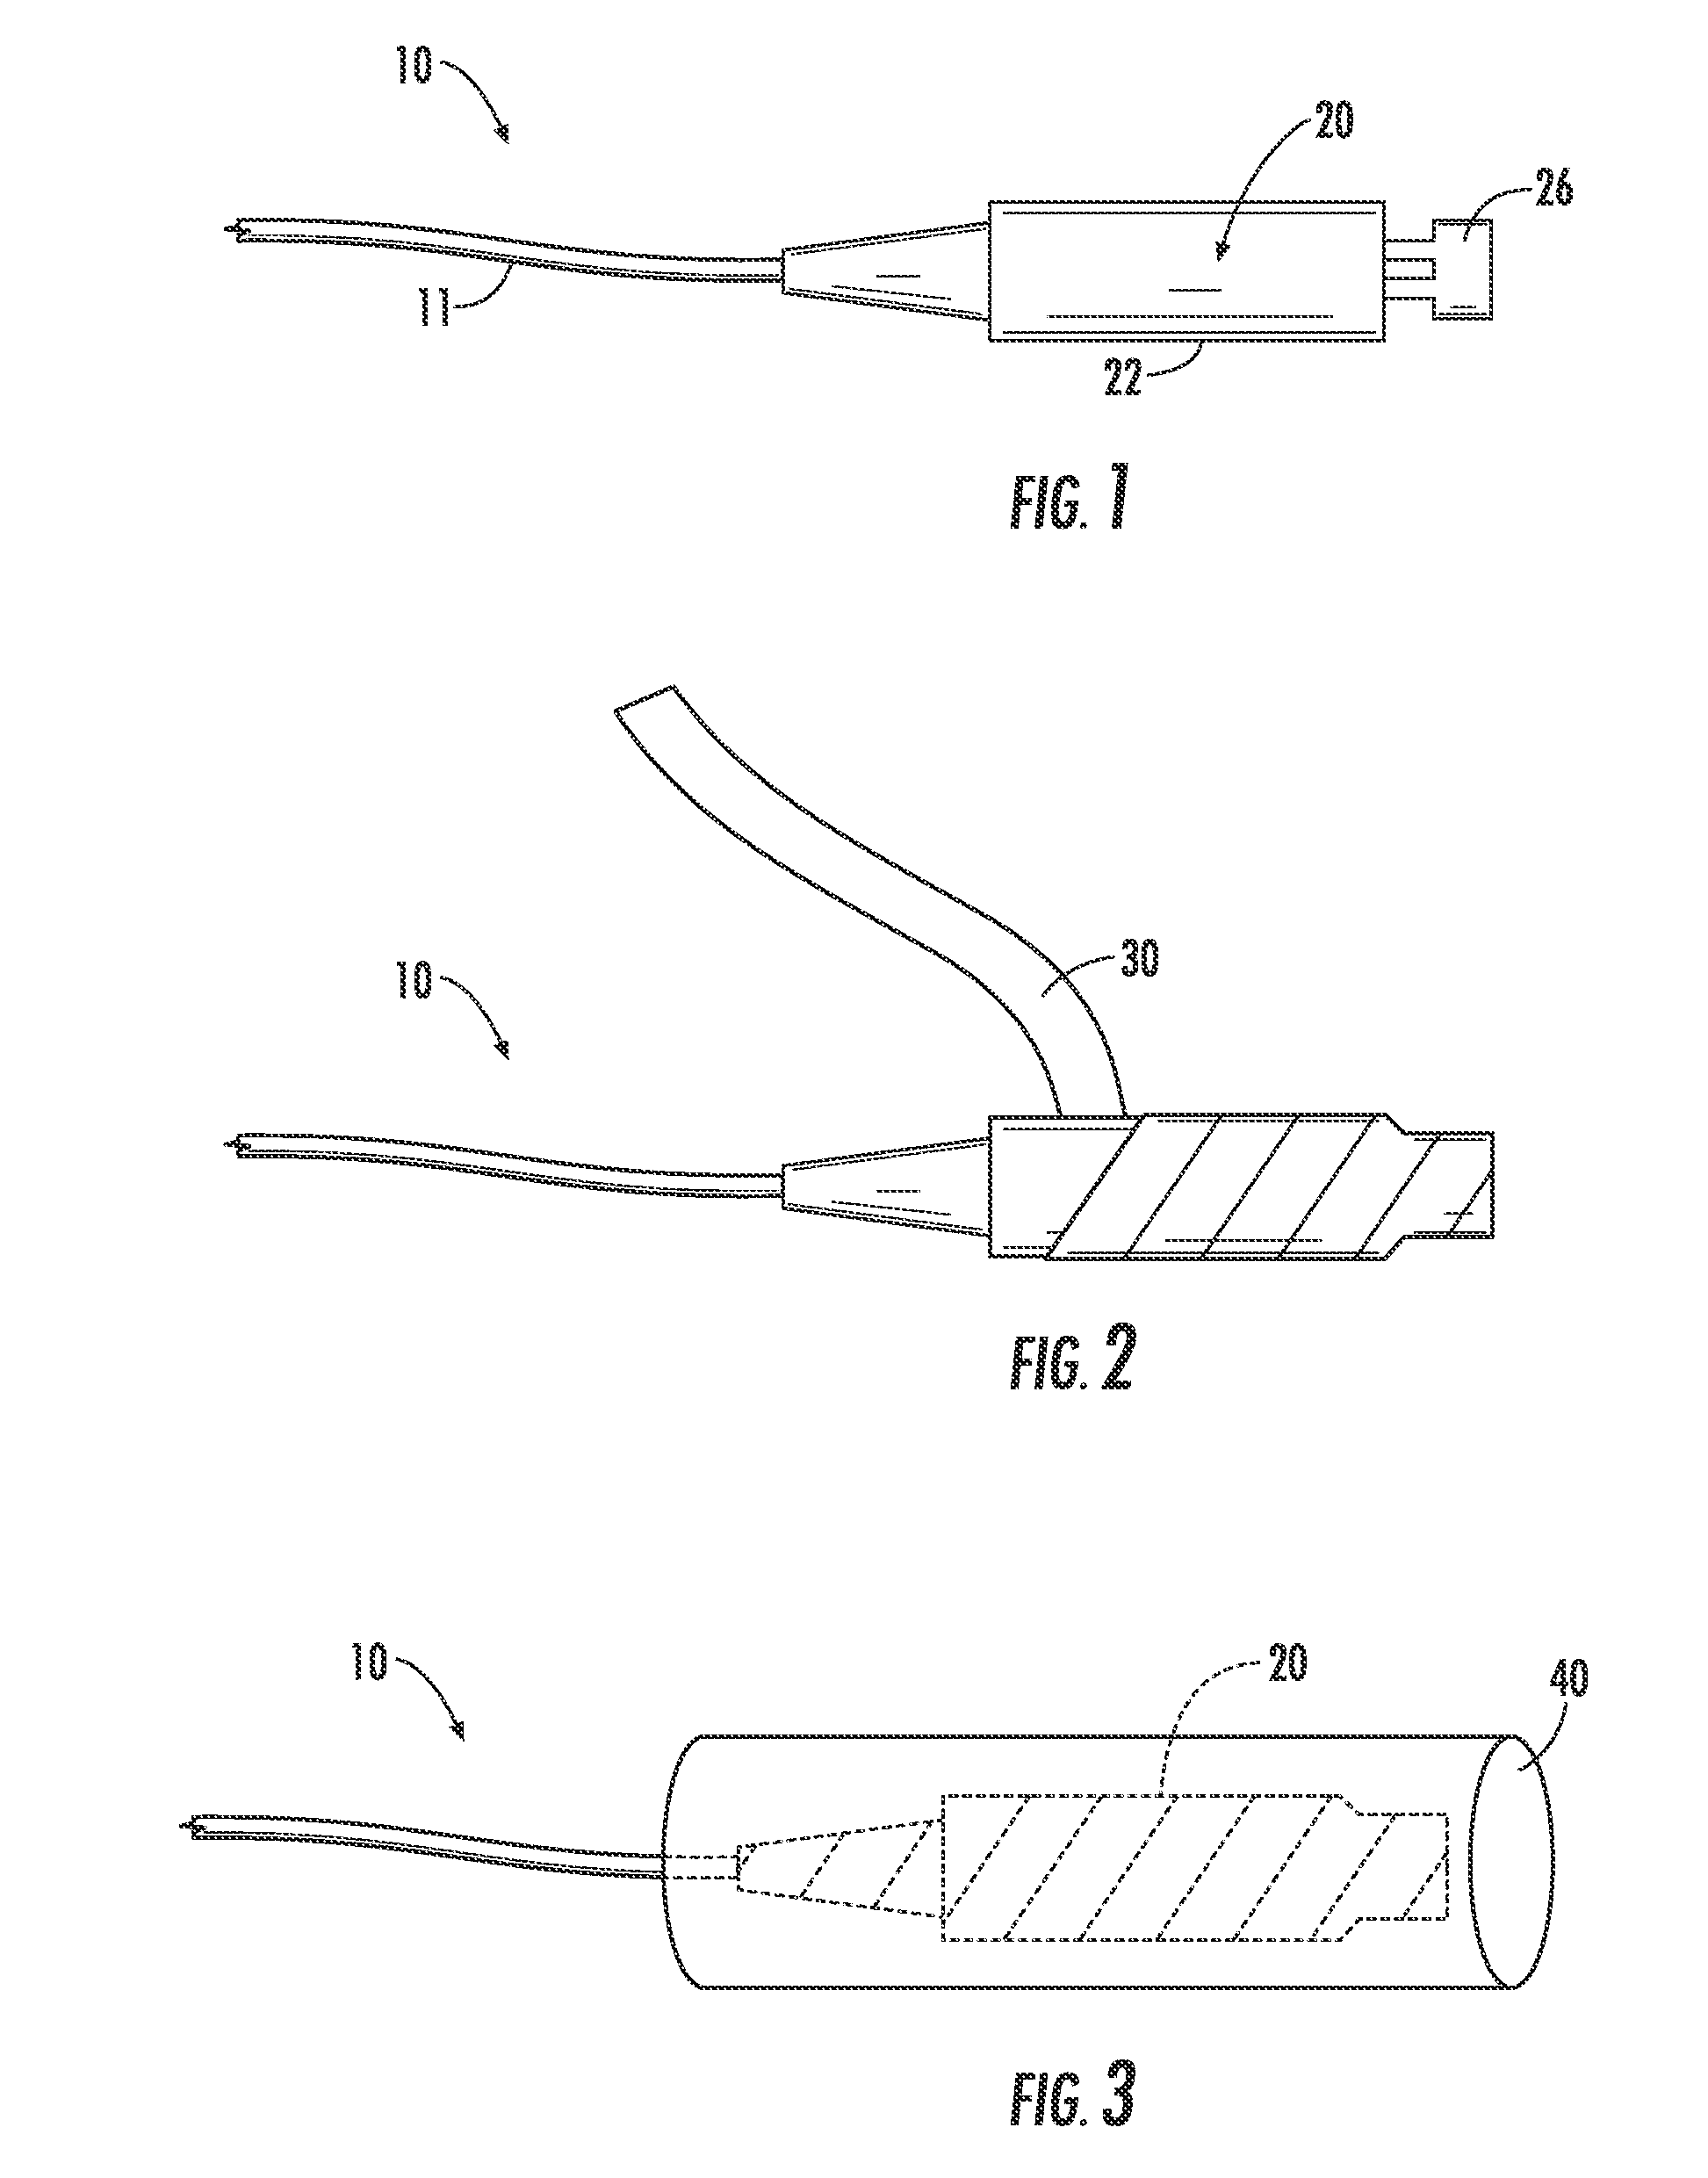 Protected Fiber Optic Assemblies and Methods for Forming the Same